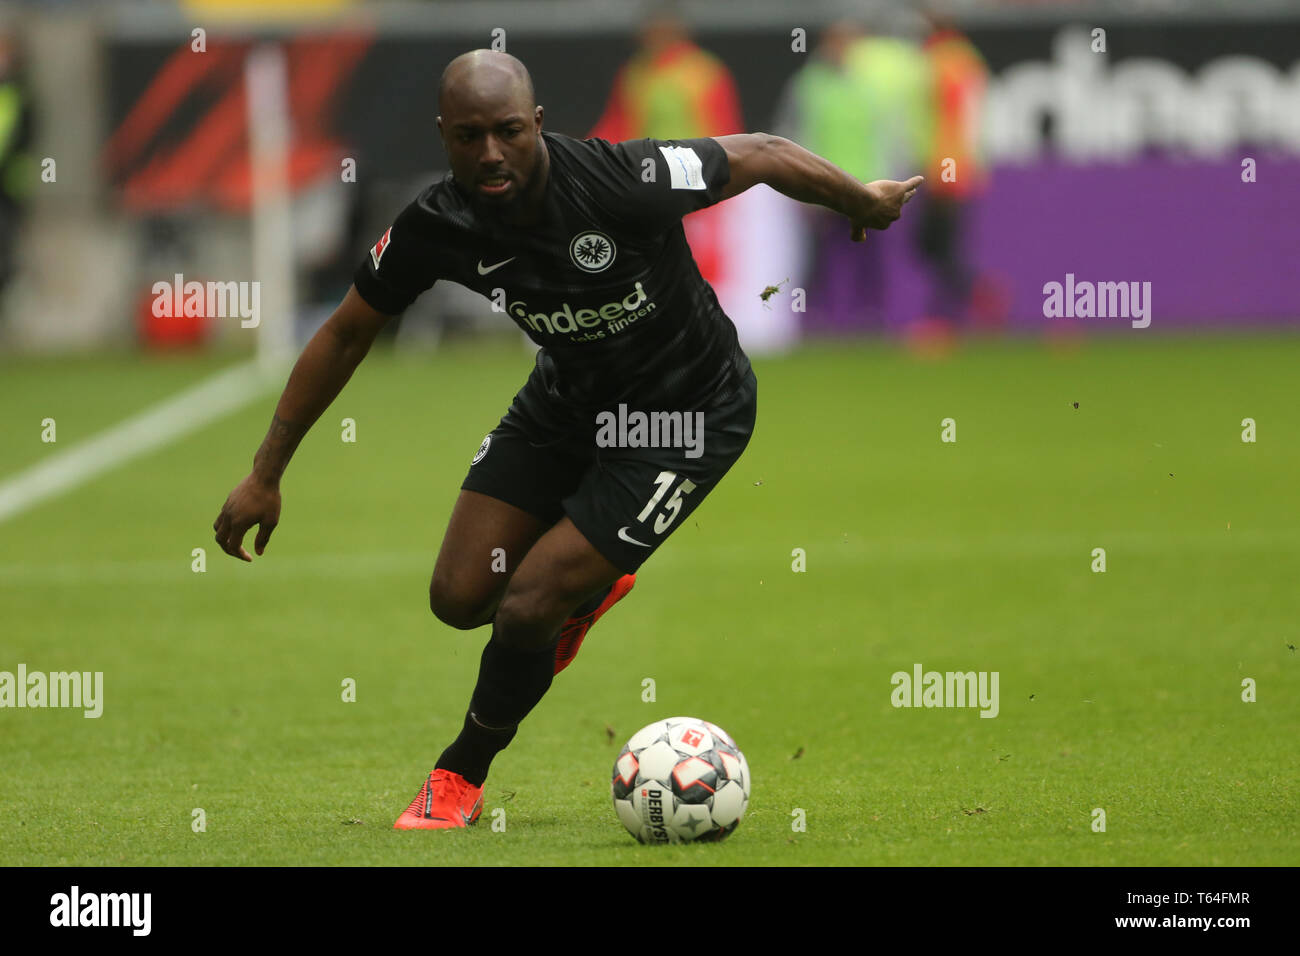 27 April 2019, Hessen, Frankfurt/M.: Soccer: Bundesliga, Eintracht Frankfurt - Hertha BSC, 31st matchday in the Commerzbank Arena. The Frankfurt Jetro Willems. Photo: Thomas Frey/dpa - IMPORTANT NOTE: In accordance with the requirements of the DFL Deutsche Fußball Liga or the DFB Deutscher Fußball-Bund, it is prohibited to use or have used photographs taken in the stadium and/or the match in the form of sequence images and/or video-like photo sequences. Stock Photo